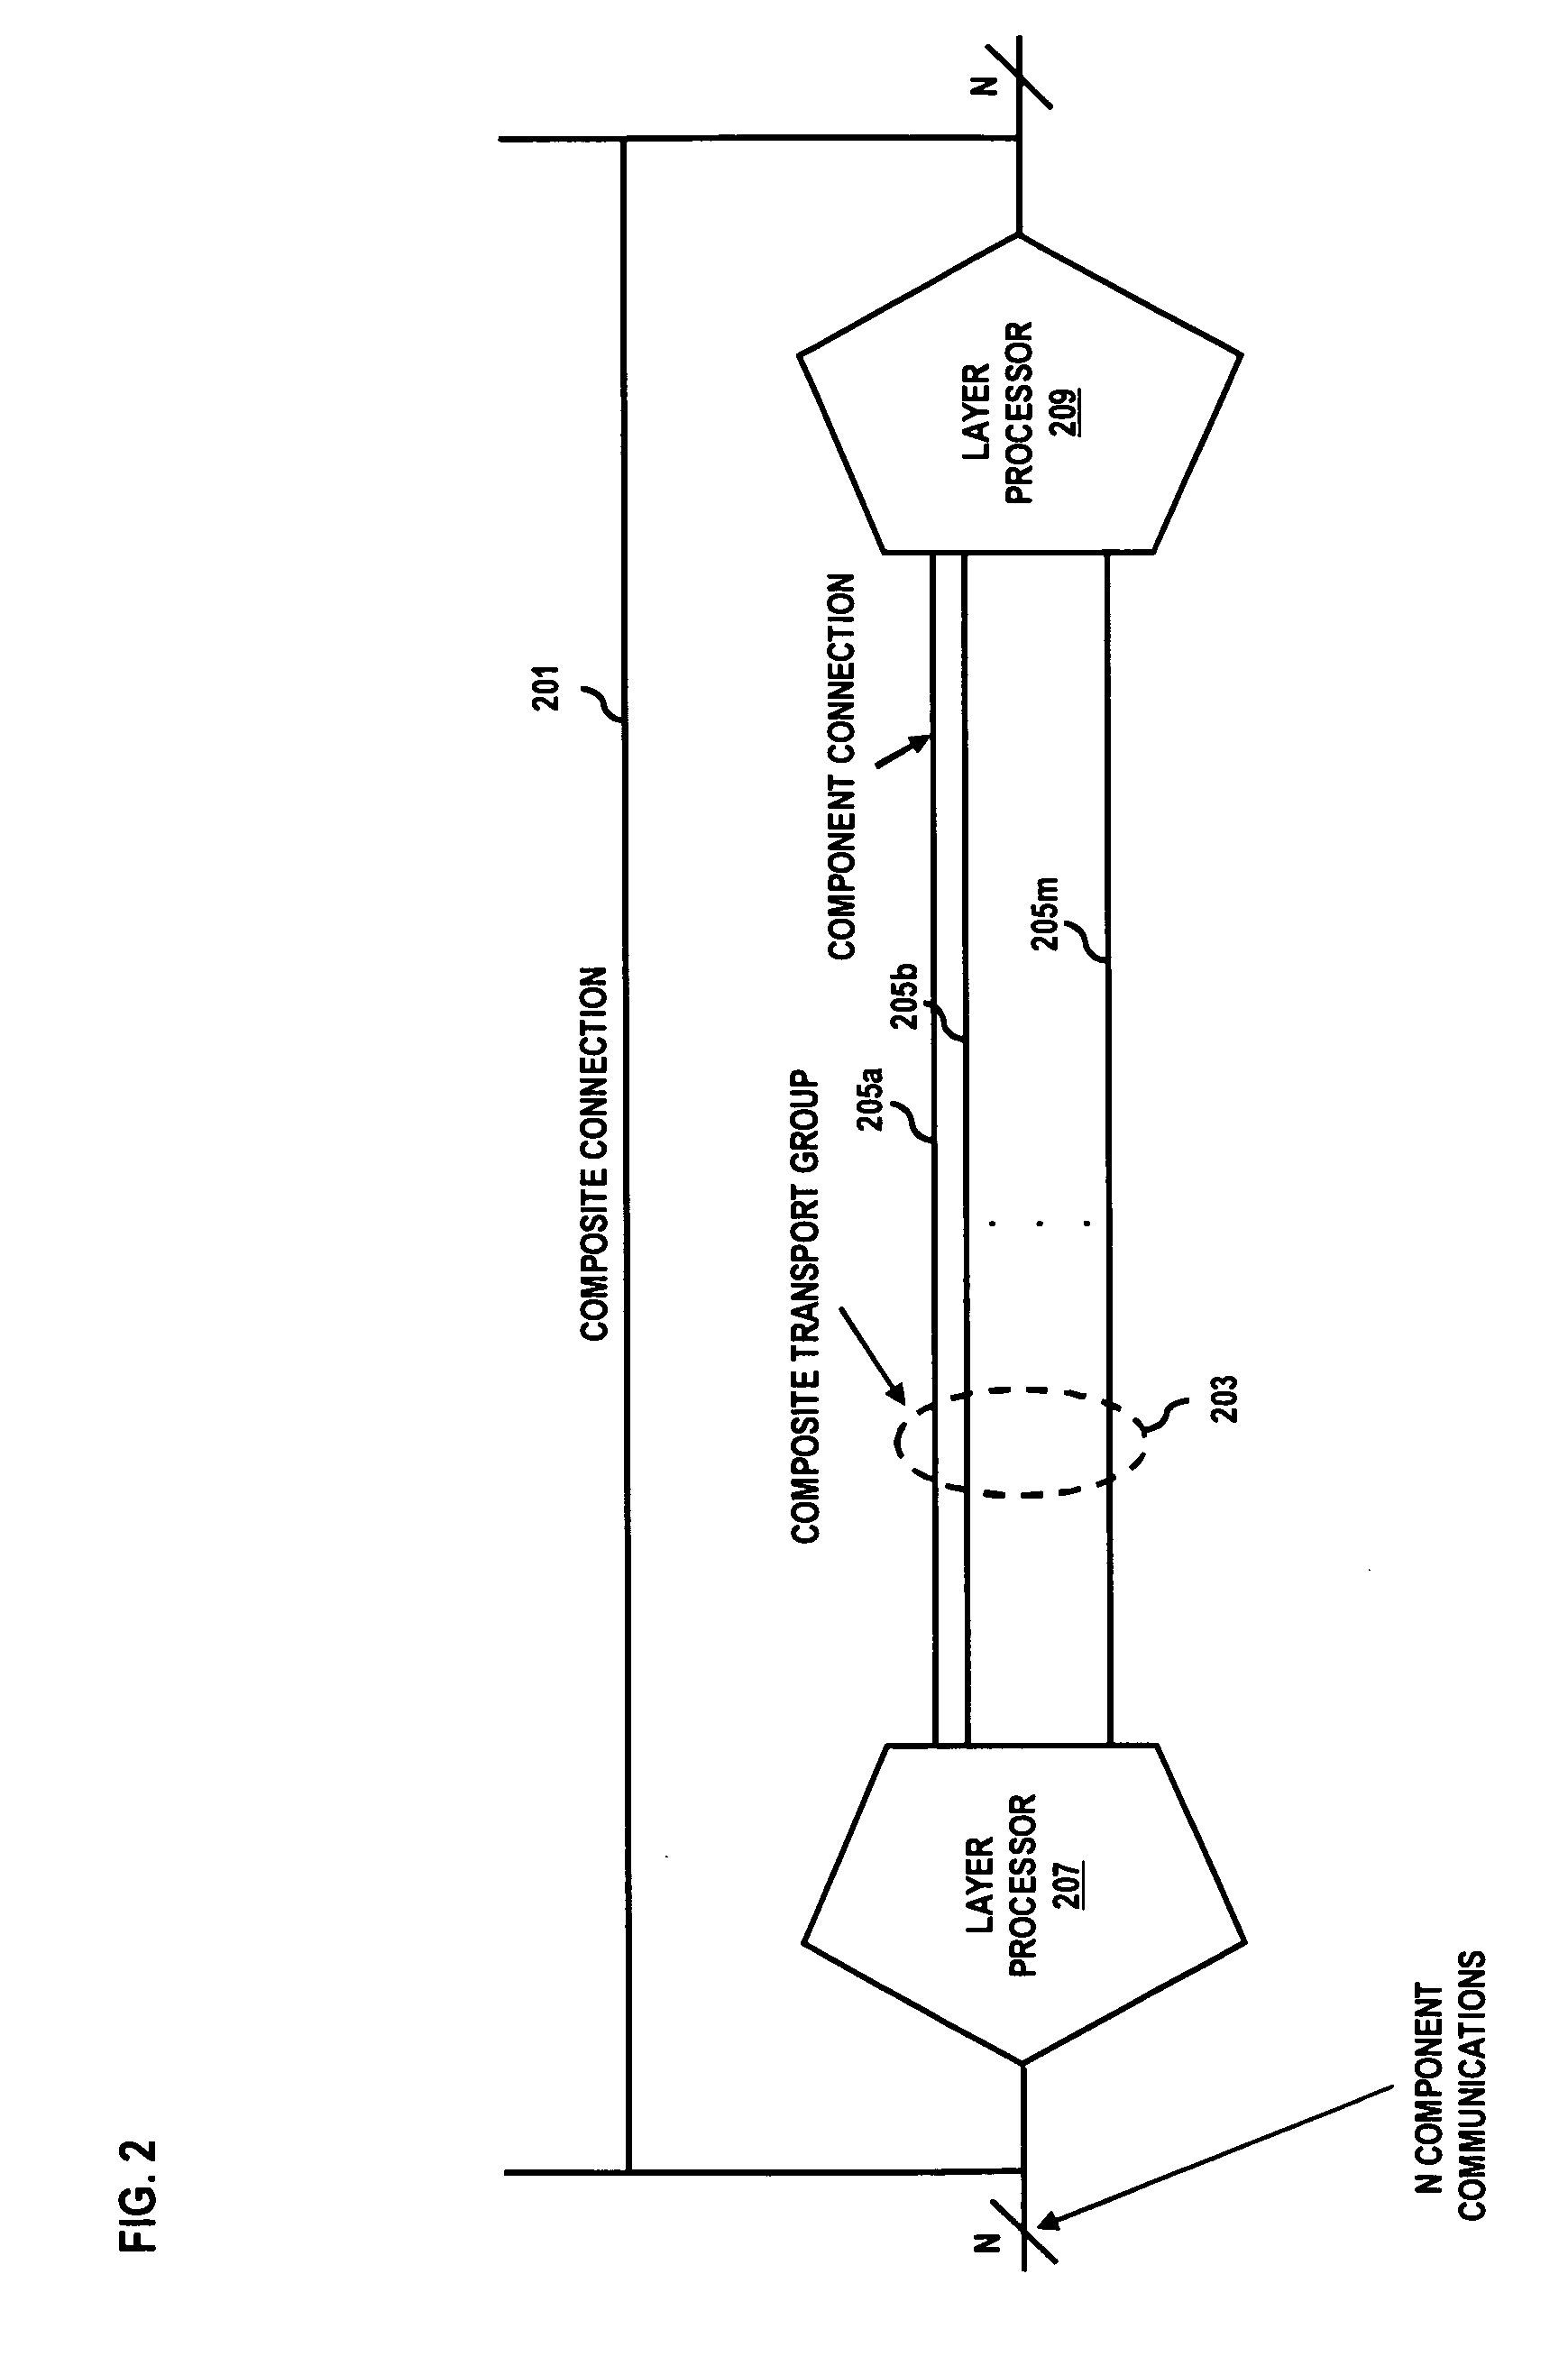 System and method for providing lower-layer path validation for higher-layer autonomous systems